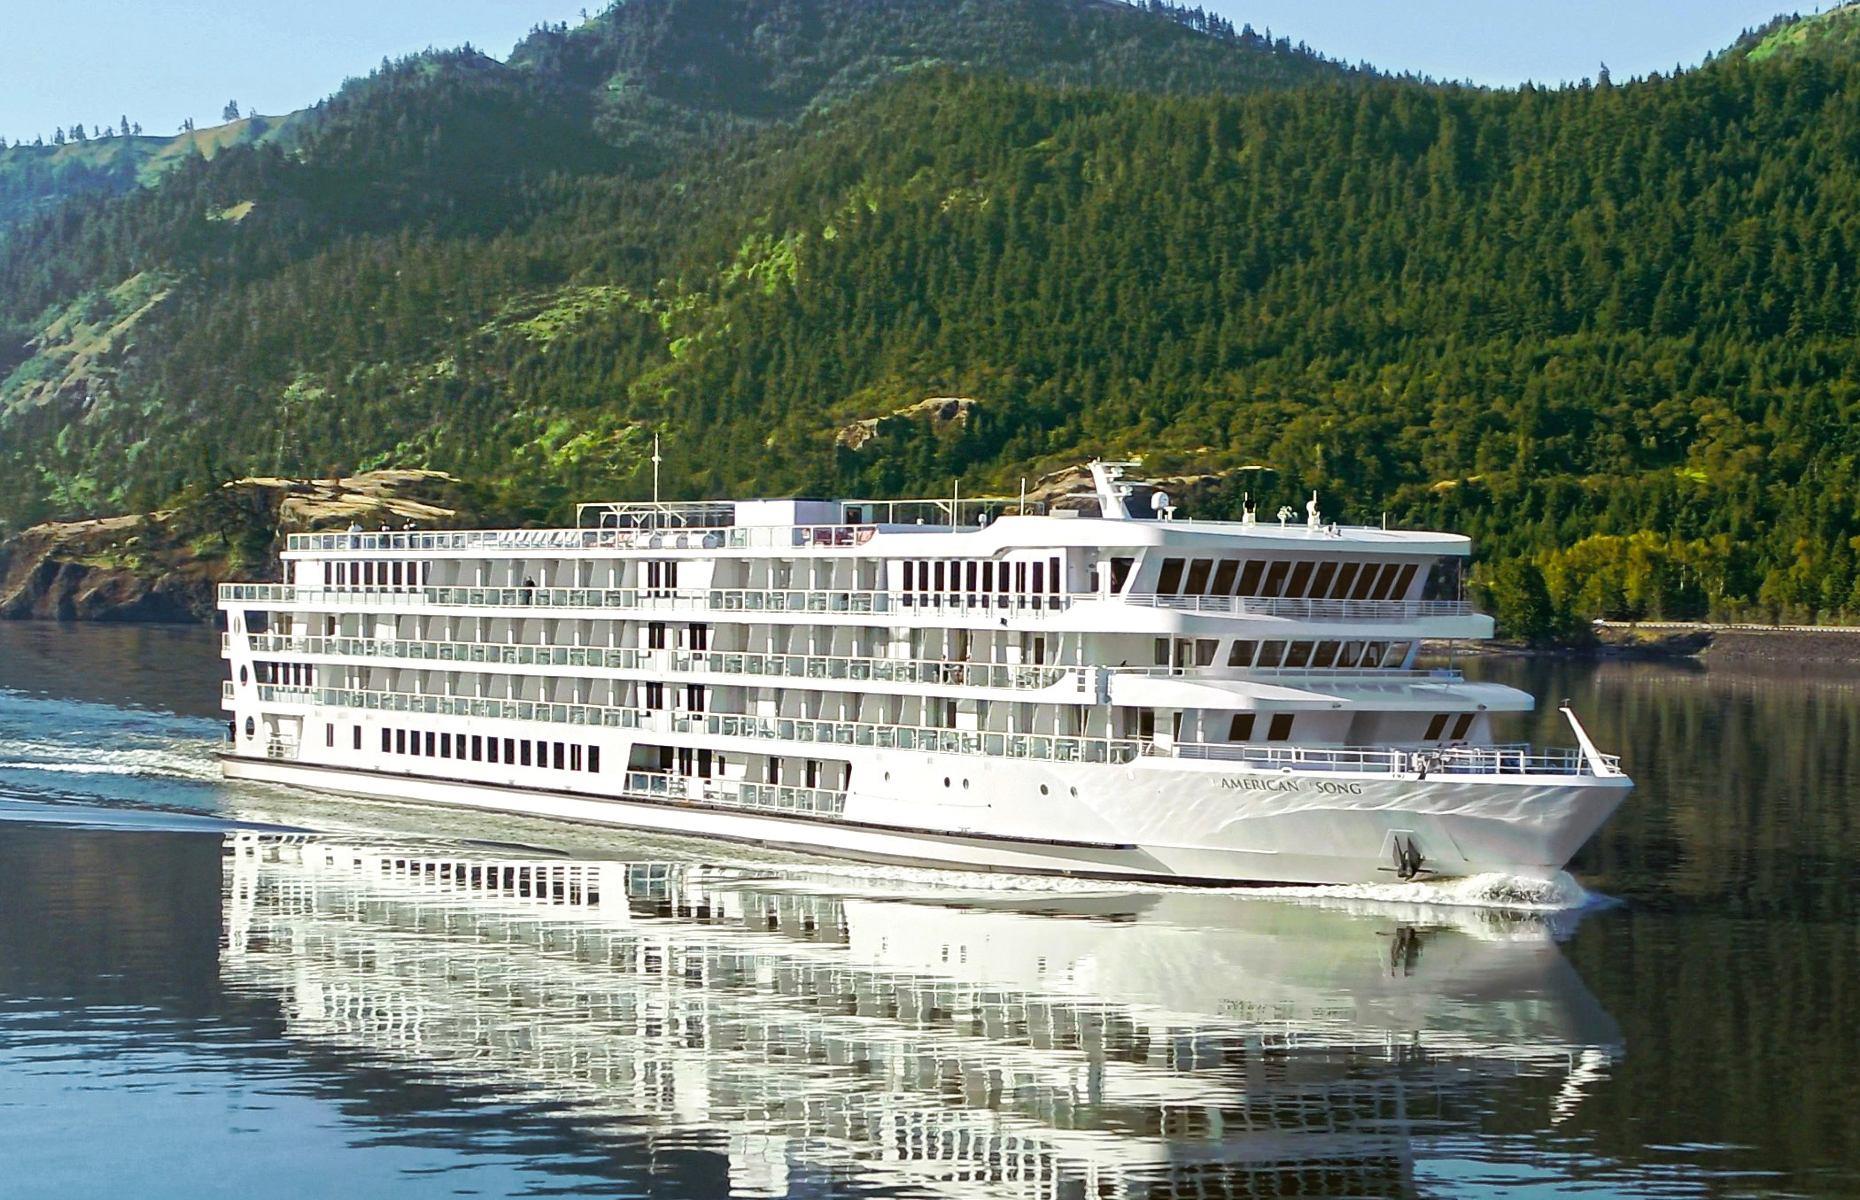 <p>As much as we love the mighty Mississippi, <a href="https://www.americancruiselines.com/cruises/columbia-and-snake-river-cruises/northwest-pioneers-cruise">this brilliant river cruise</a>, which wiggles through Oregon and Washington, is a fantastic reminder that there are plenty of other breathtakingly beautiful waterways to explore. On this adventure, you’ll sail along the Columbia River – the largest in America’s Pacific Northwest – and Snake River, which is the Columbia River’s biggest tributary. It’s a great way to see some of America’s most underrated destinations, including the town of Astoria, which is the oldest American settlement west of the Rockies.</p>